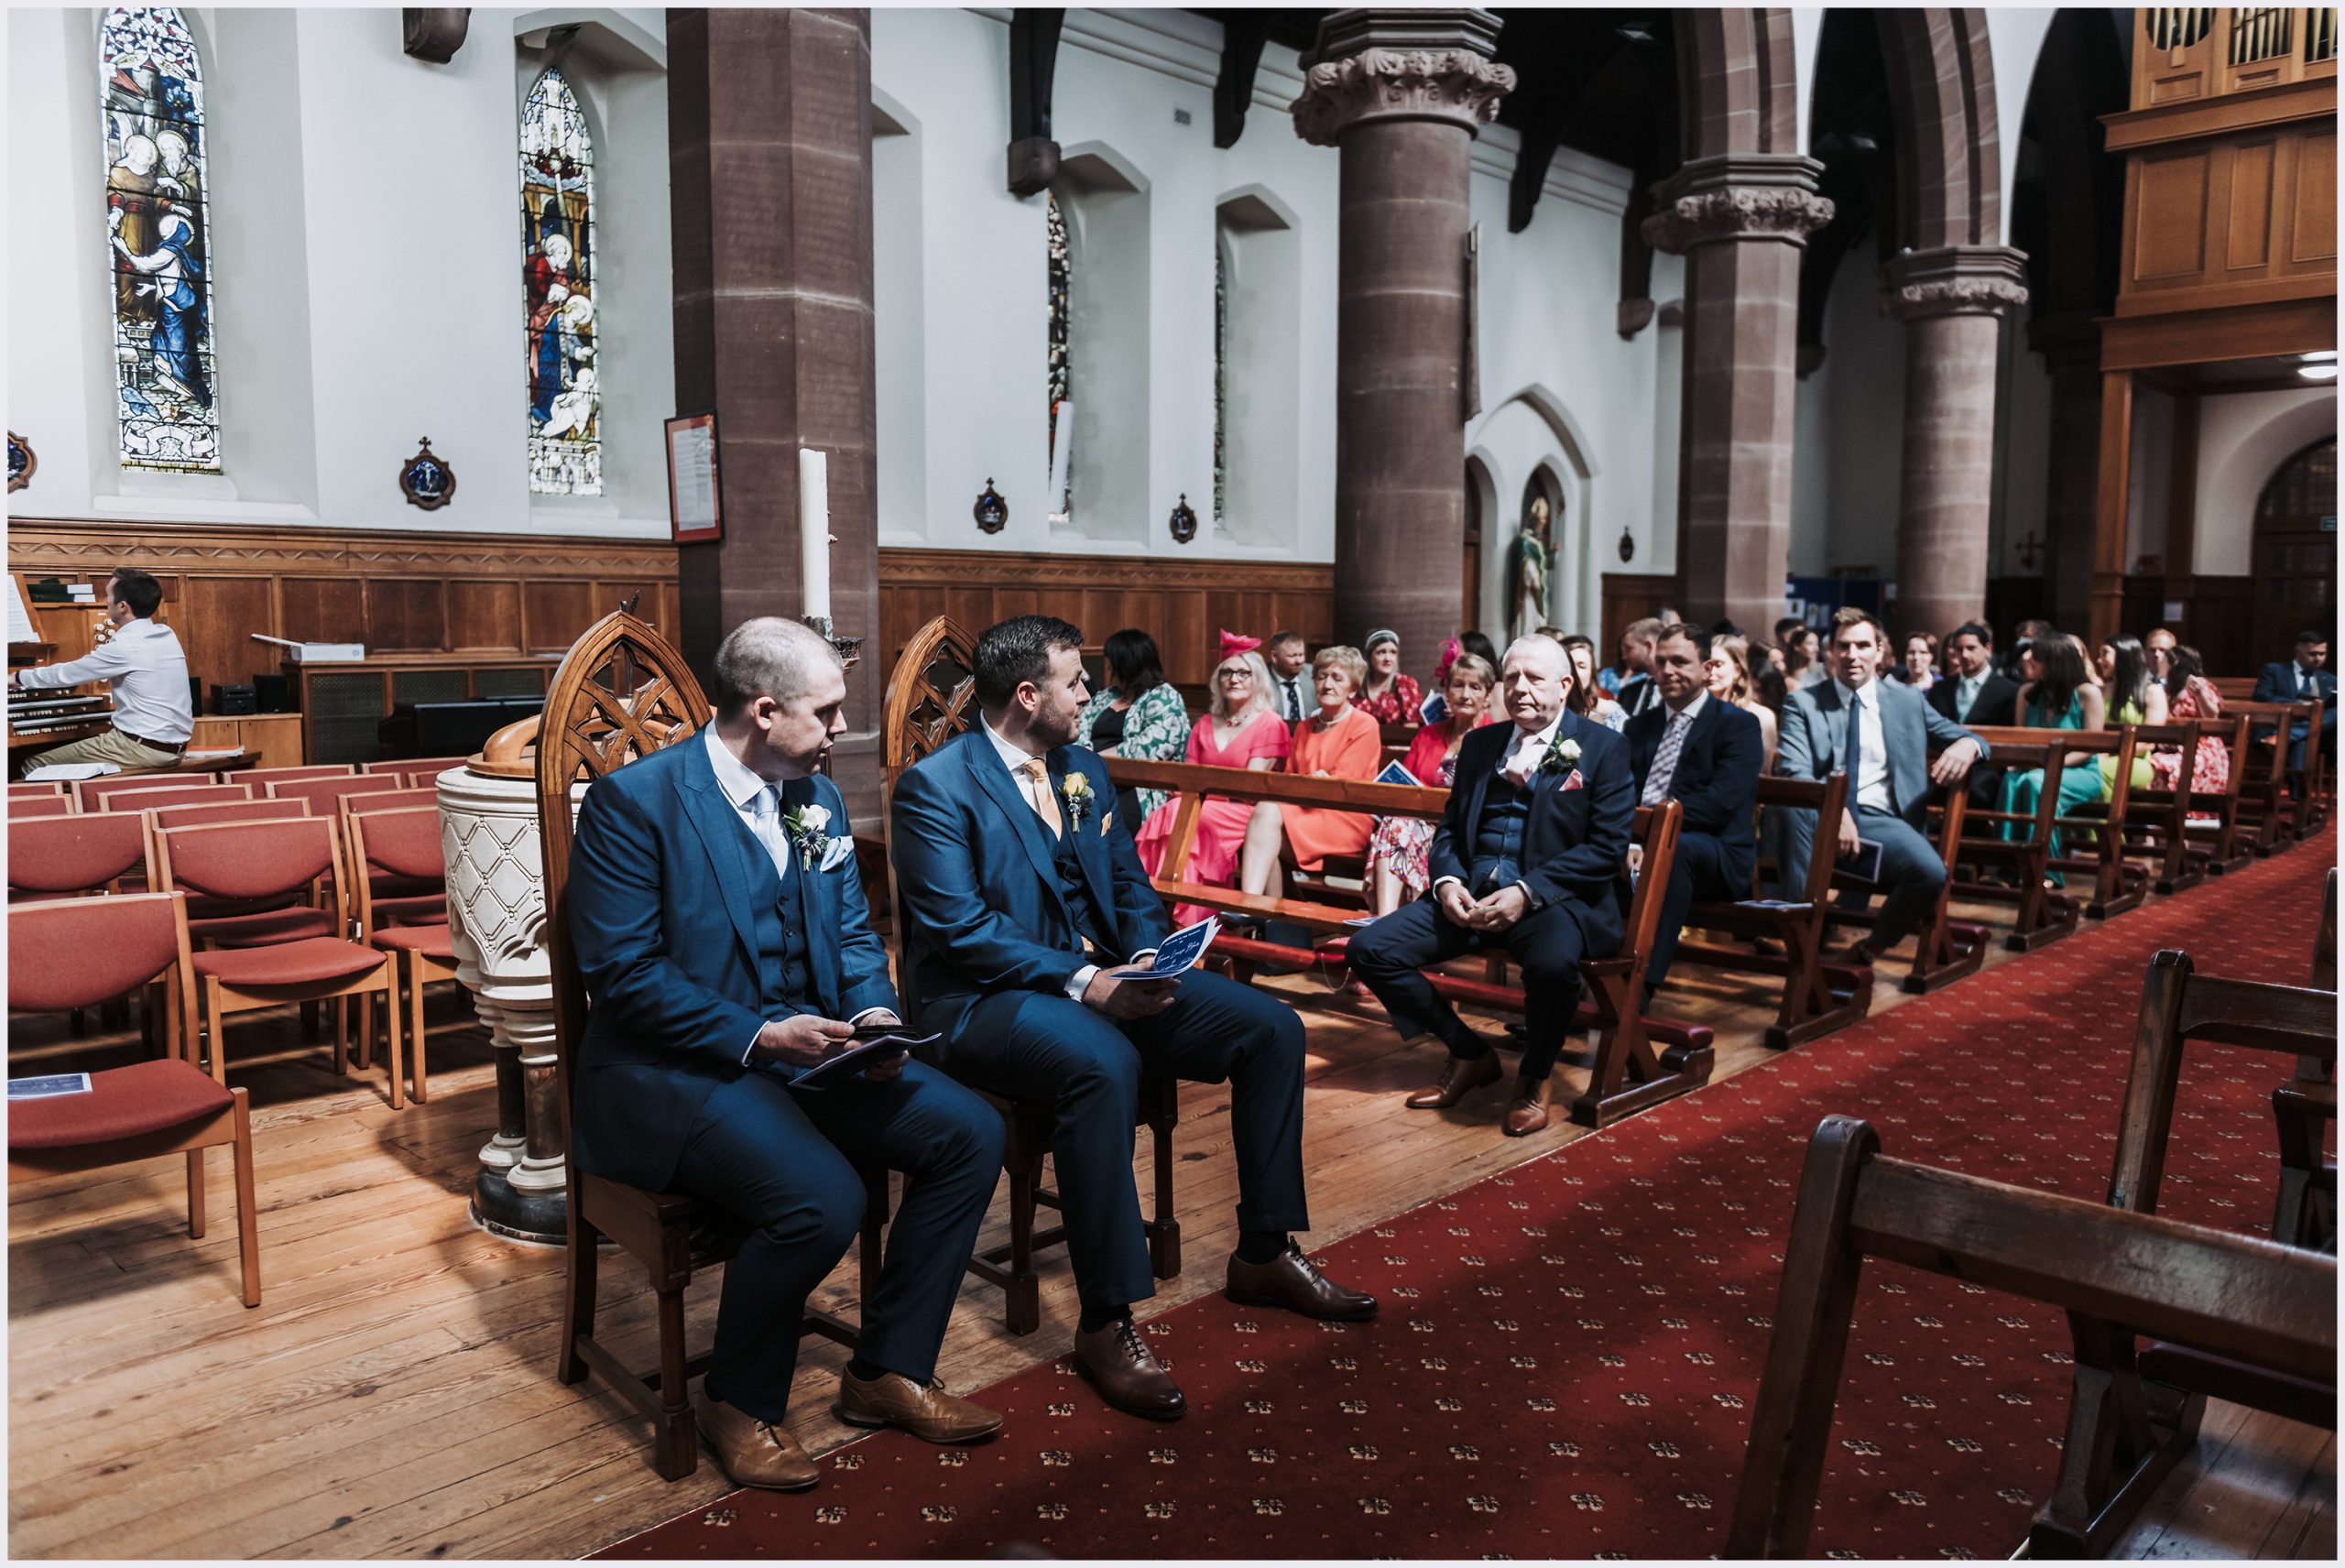 A groom and his best man sit in grand chairs at the top of the aisle of a church while the wedding guests watch on before the wedding ceremony